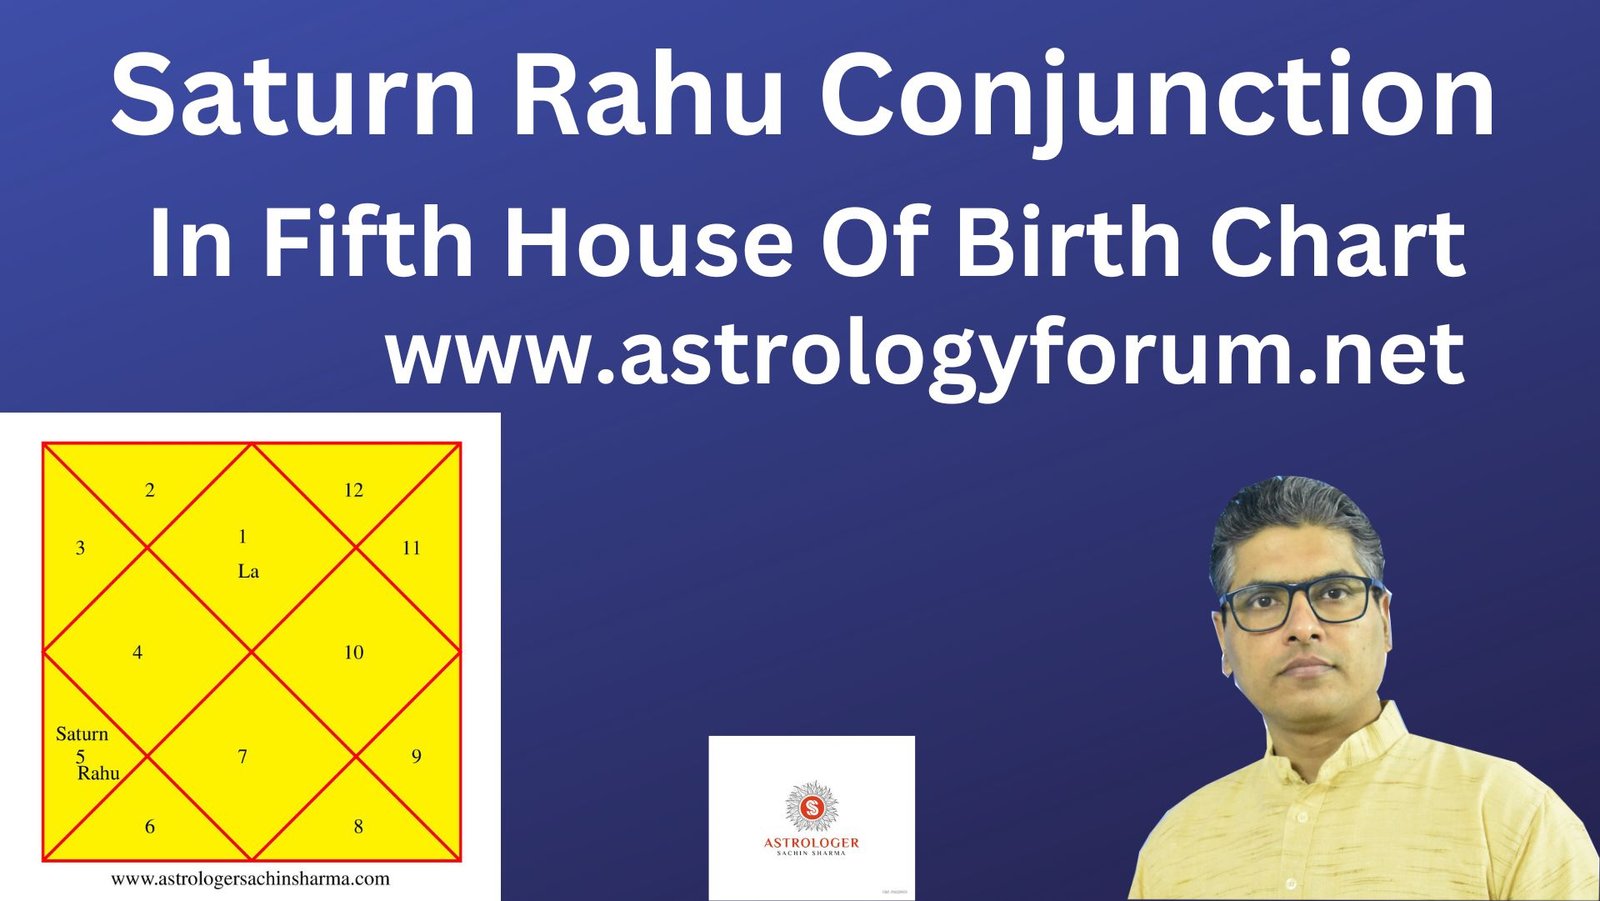 Rahu Saturn conjunction in the 5th house